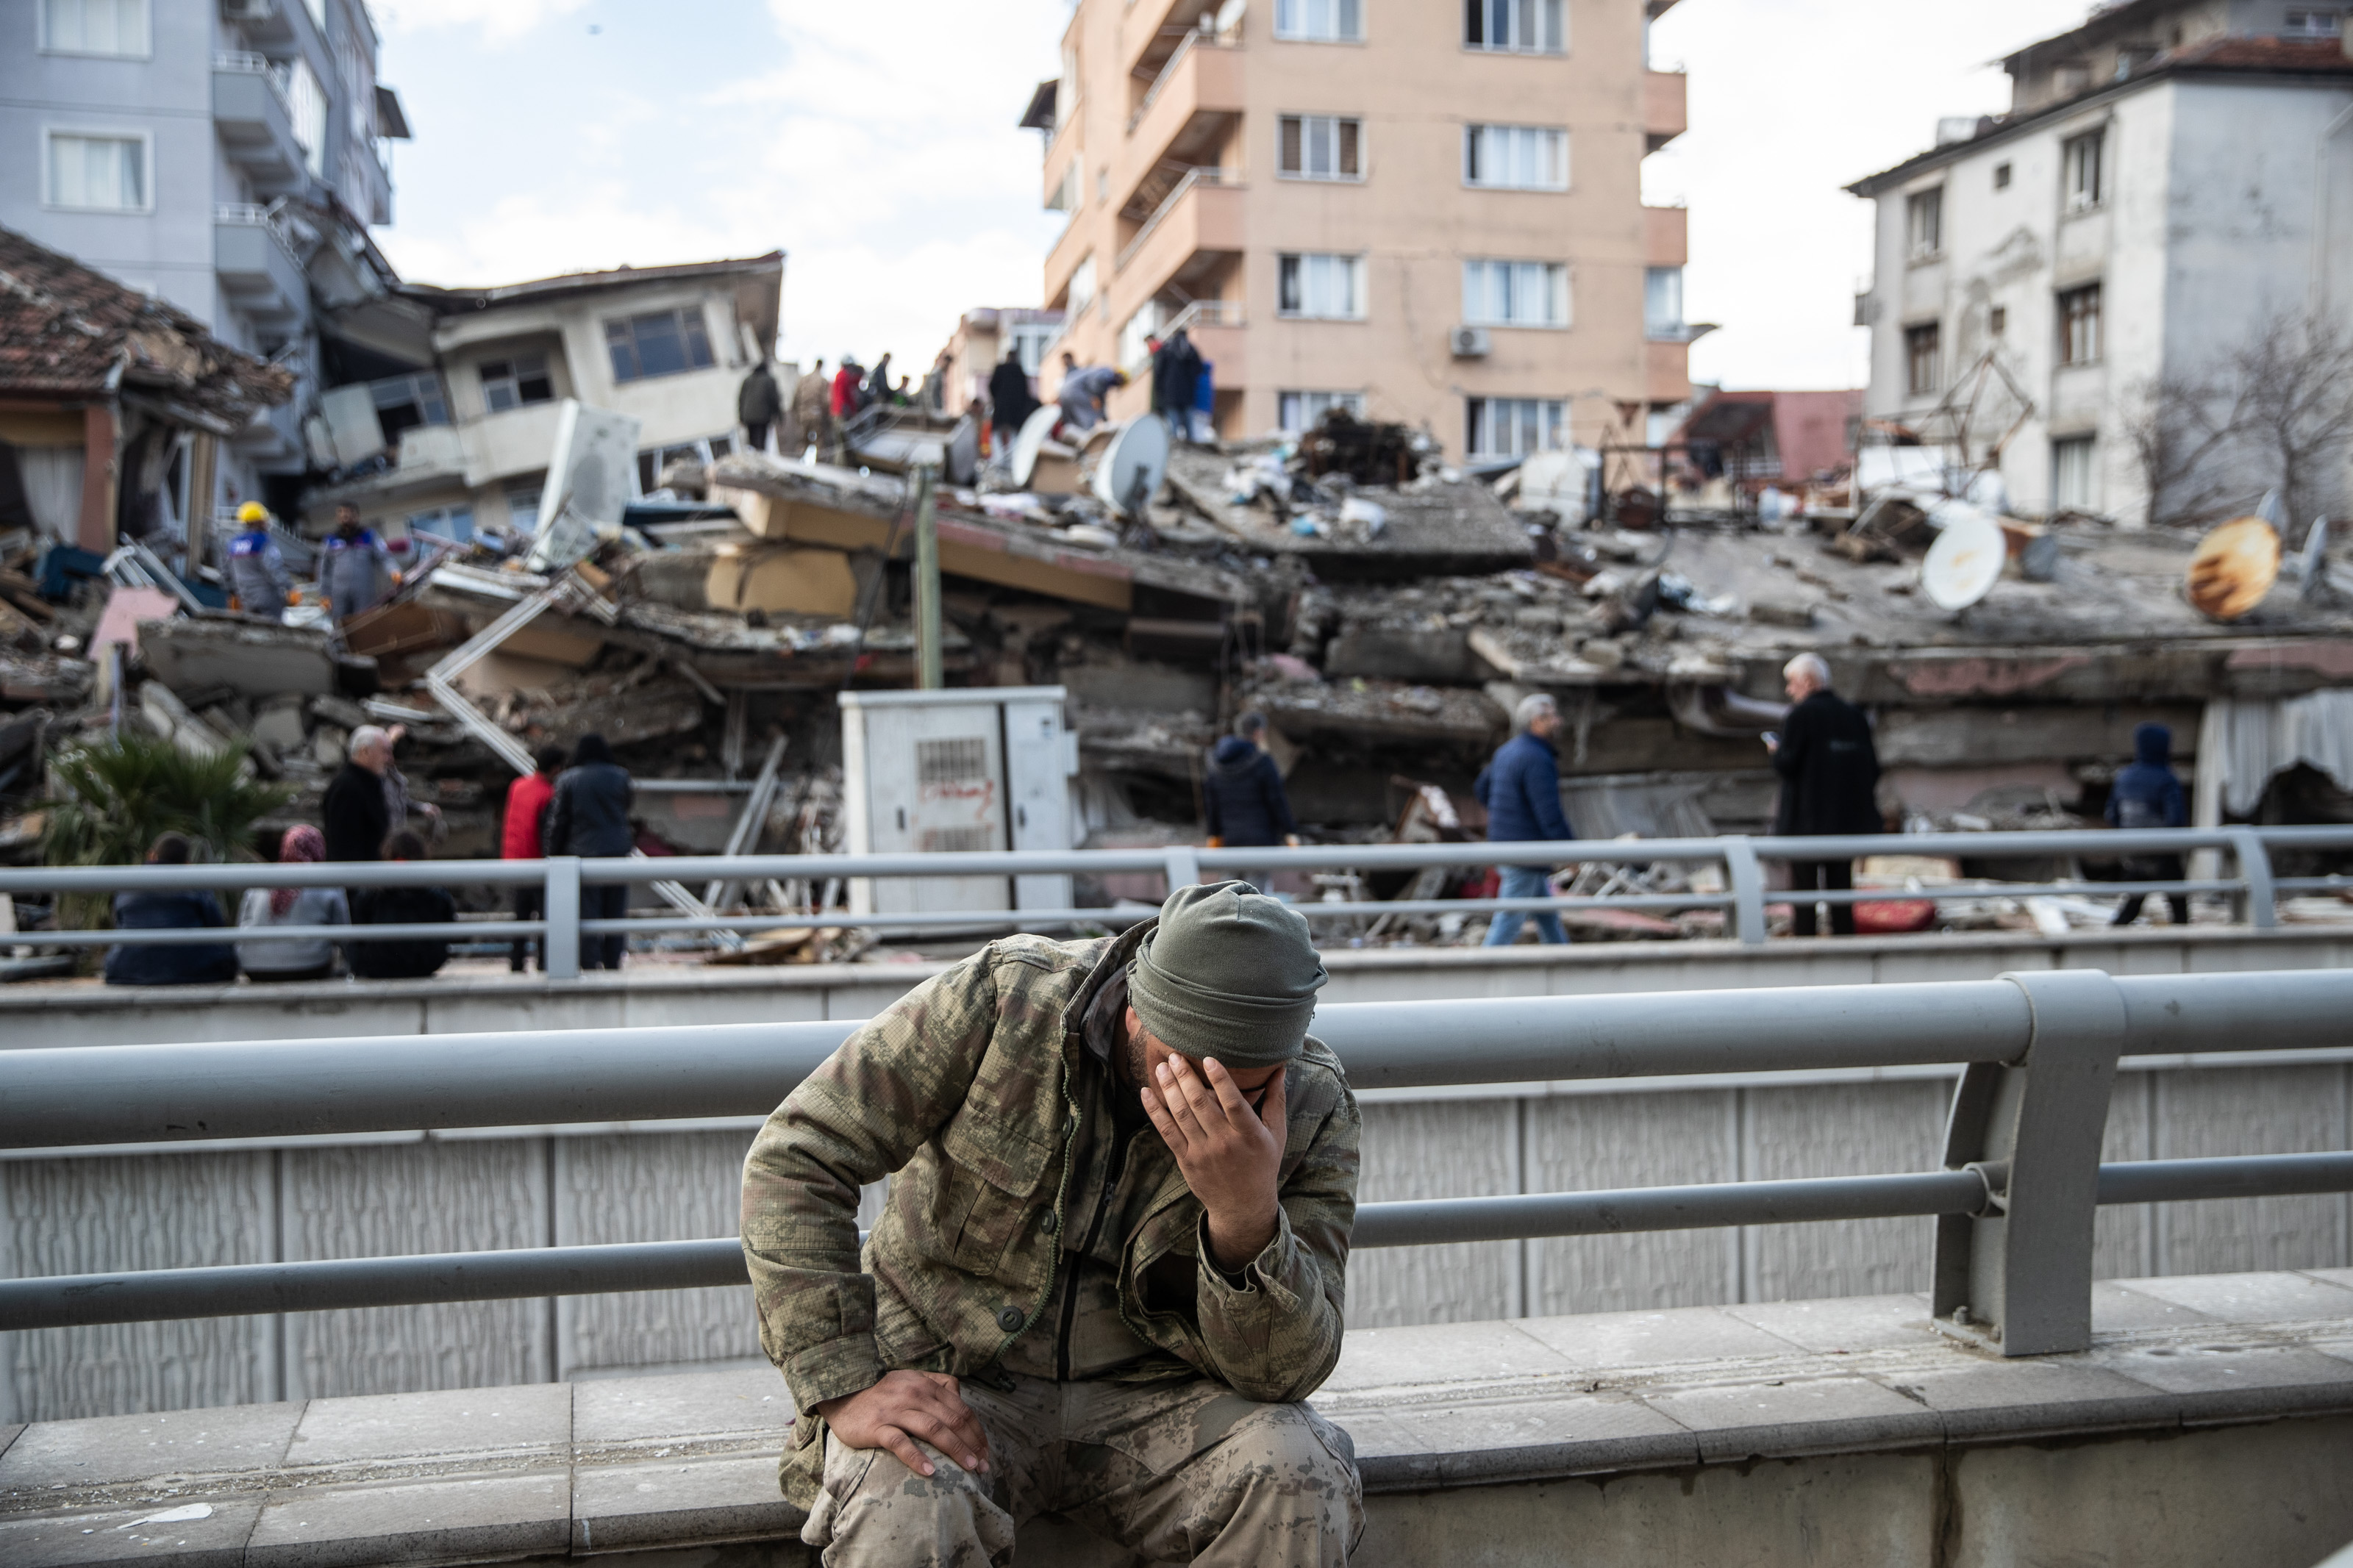 HATAY, TURKEY - FEBRUARY 07: A soldier sits devastated near the collapsed building on February 07, 2023 in Hatay, Turkey. A 7.8-magnitude earthquake hit near Gaziantep, Turkey, in the early hours of Monday, followed by another 7.5-magnitude tremor just after midday. The quakes caused widespread destruction in southern Turkey and northern Syria and were felt in nearby countries. (Photo by Burak Kara/Getty Images)